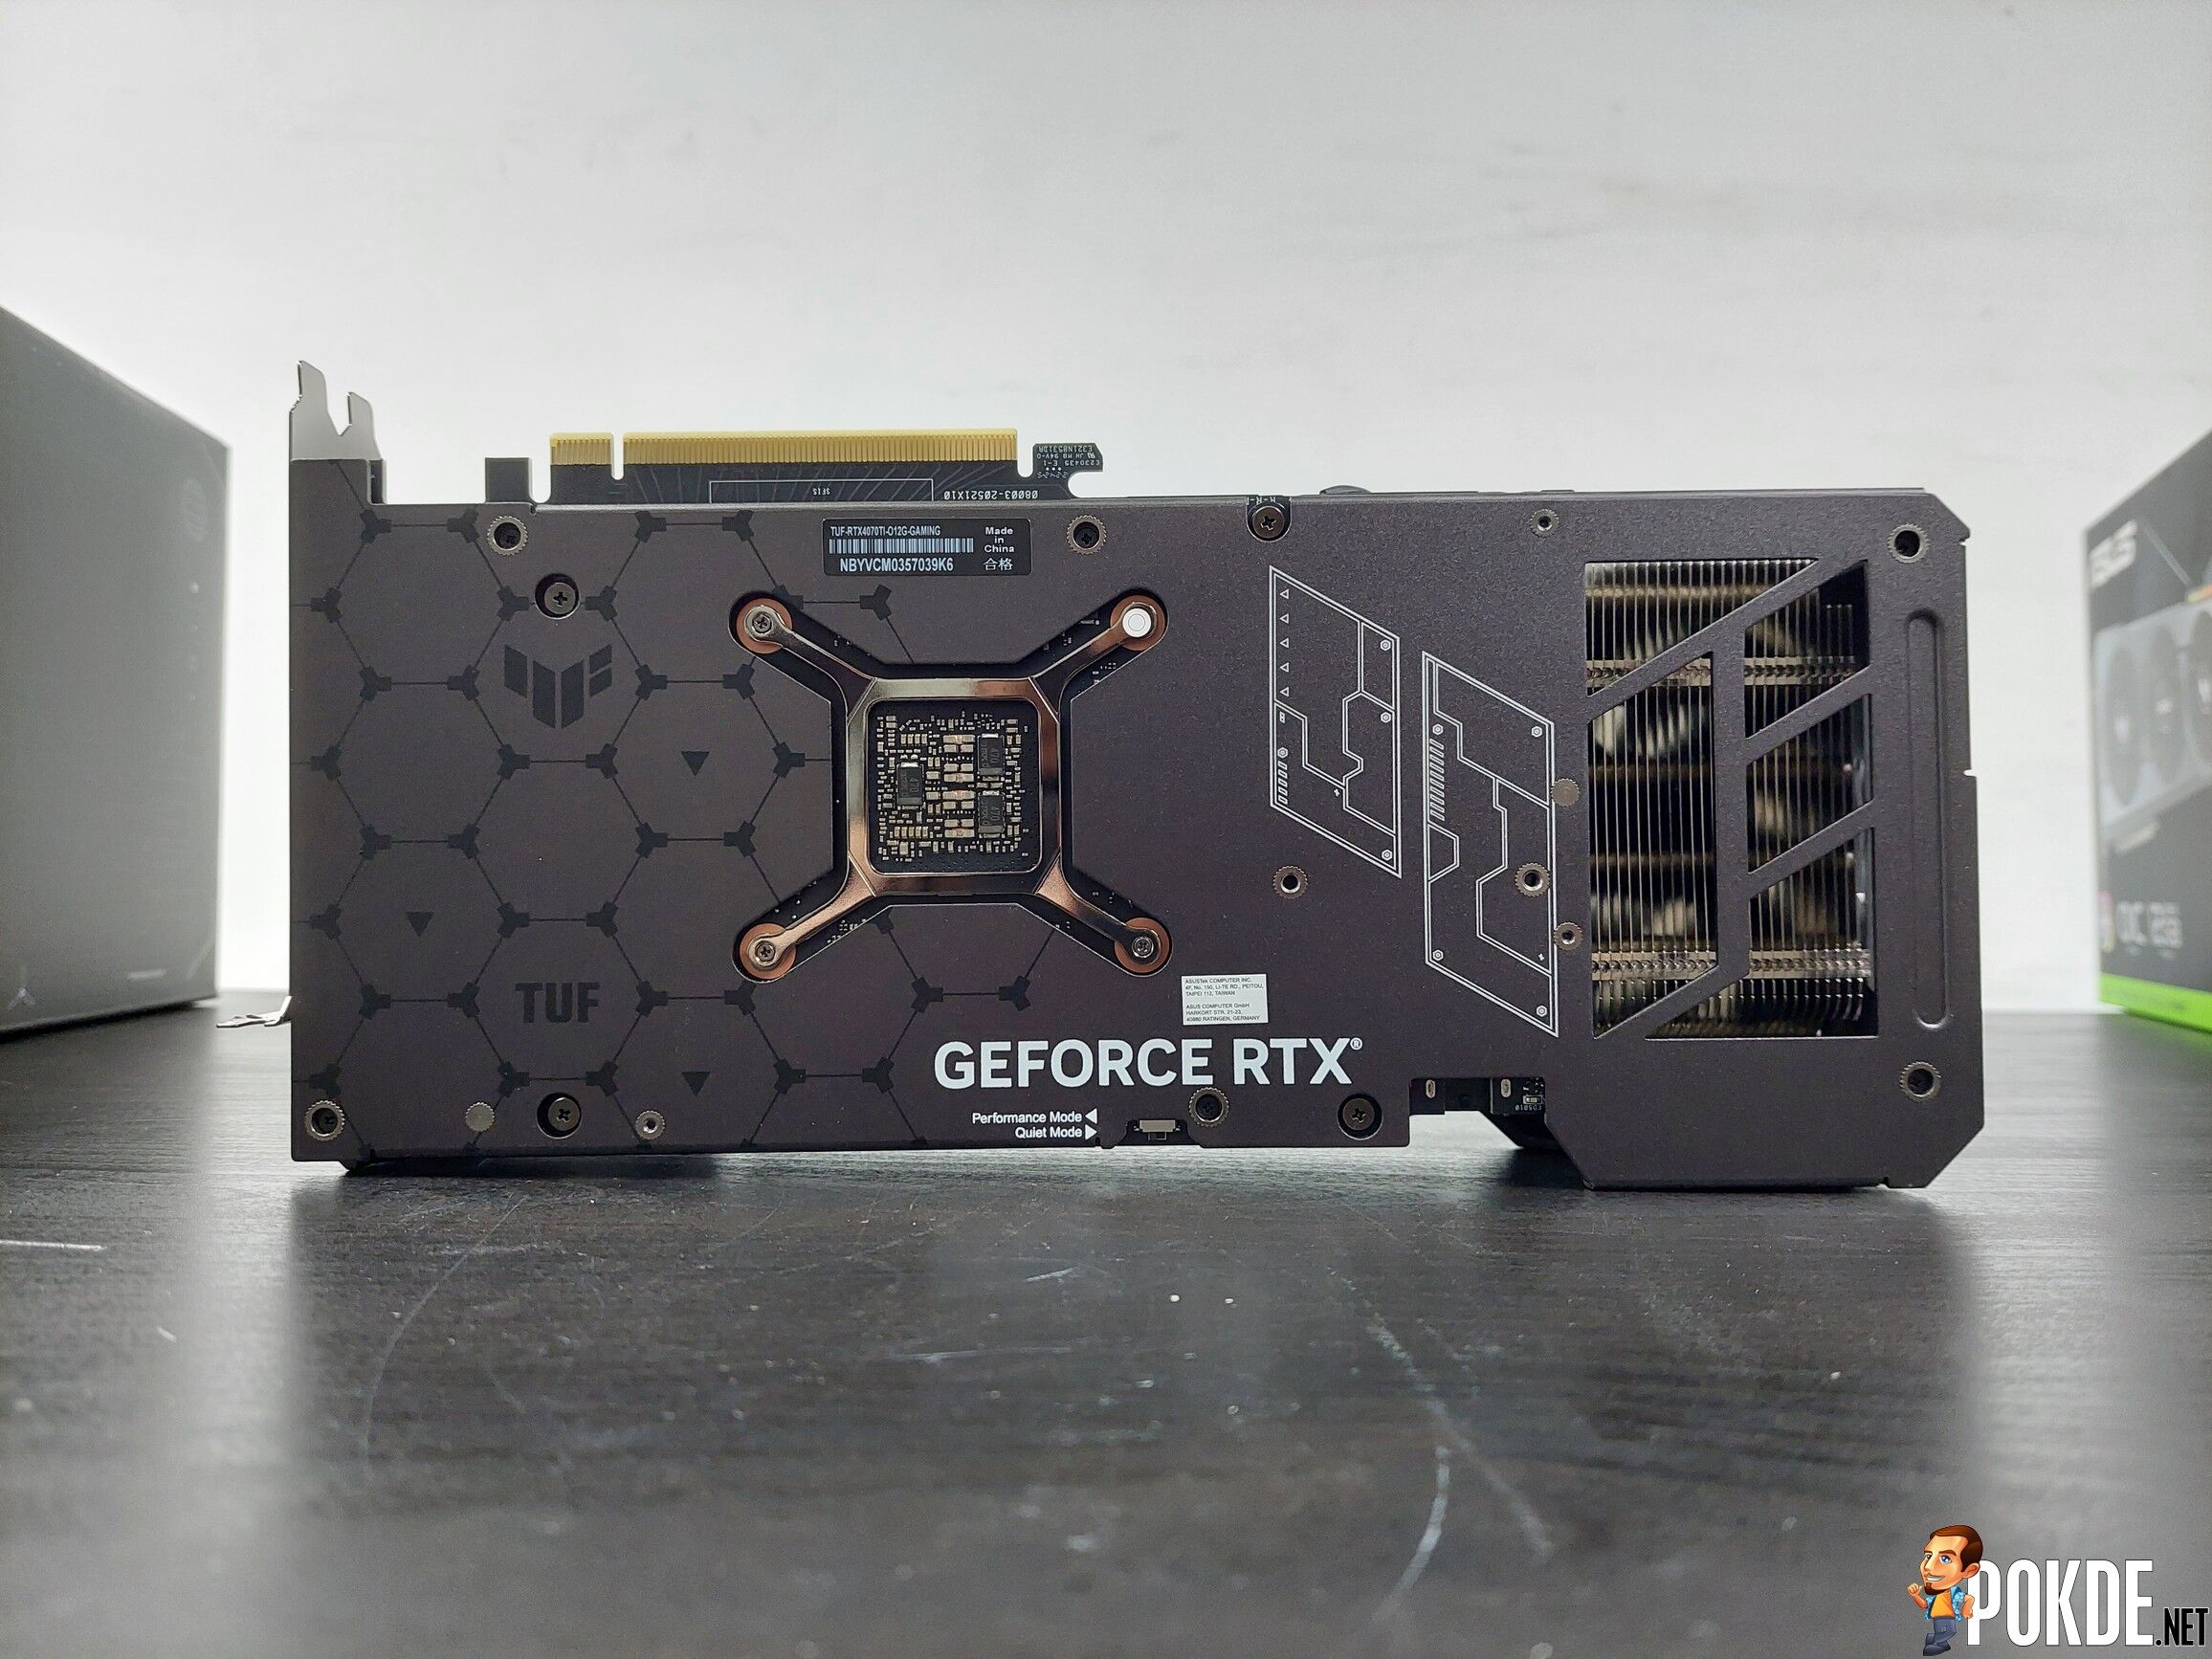 ASUS TUF Gaming GeForce RTX 4070 Ti OC Edition Review - Value Is Relative... 30